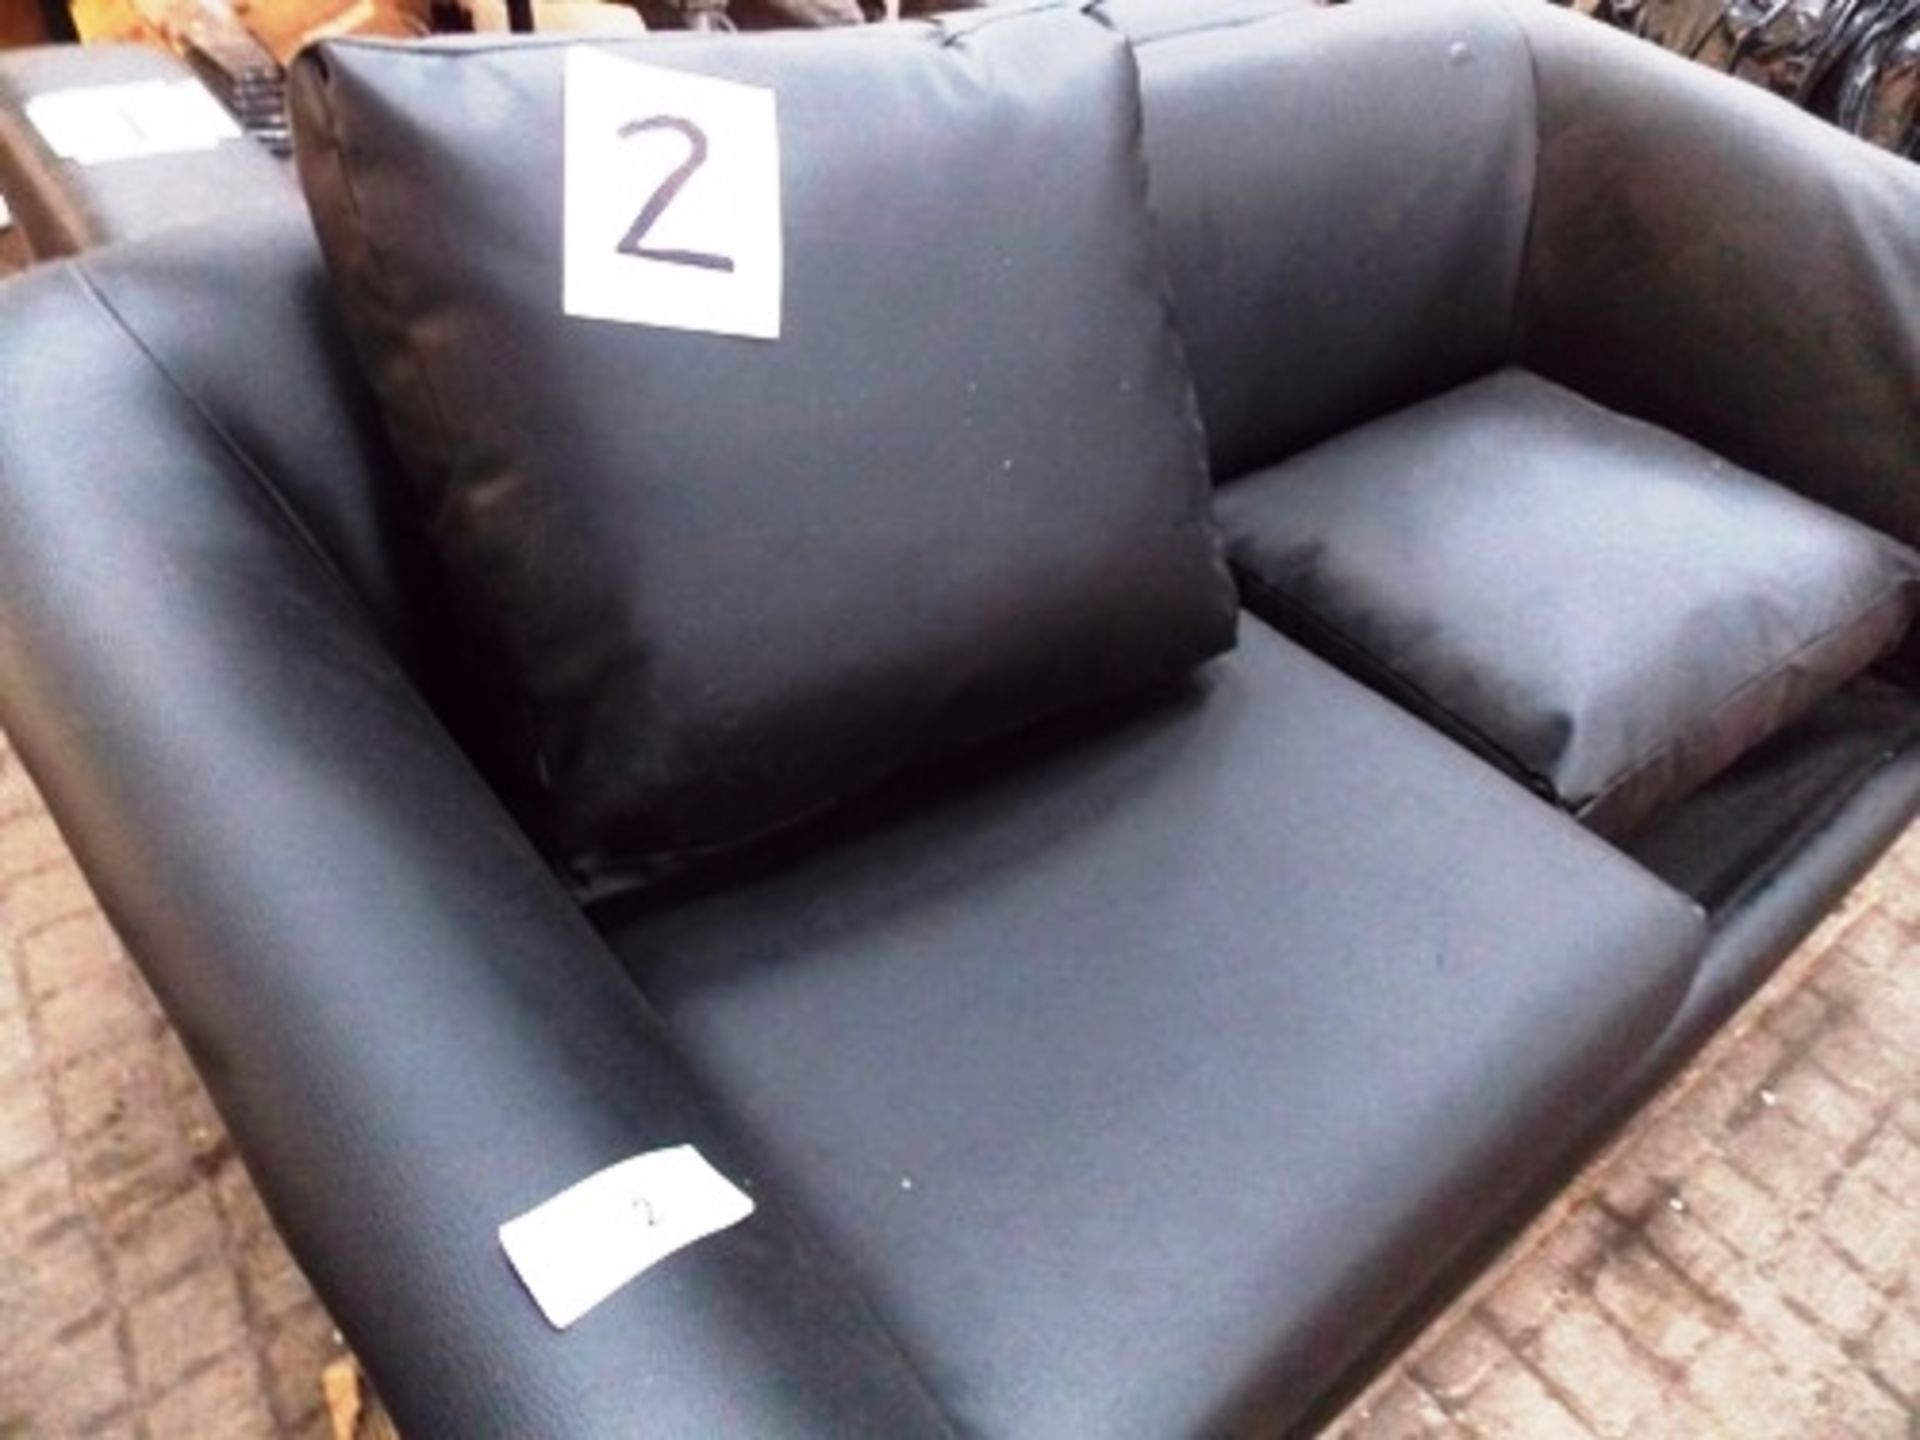 An unbranded 2 seater sofa, finished in black faux leather, missing 1 cushion, with broken armrest